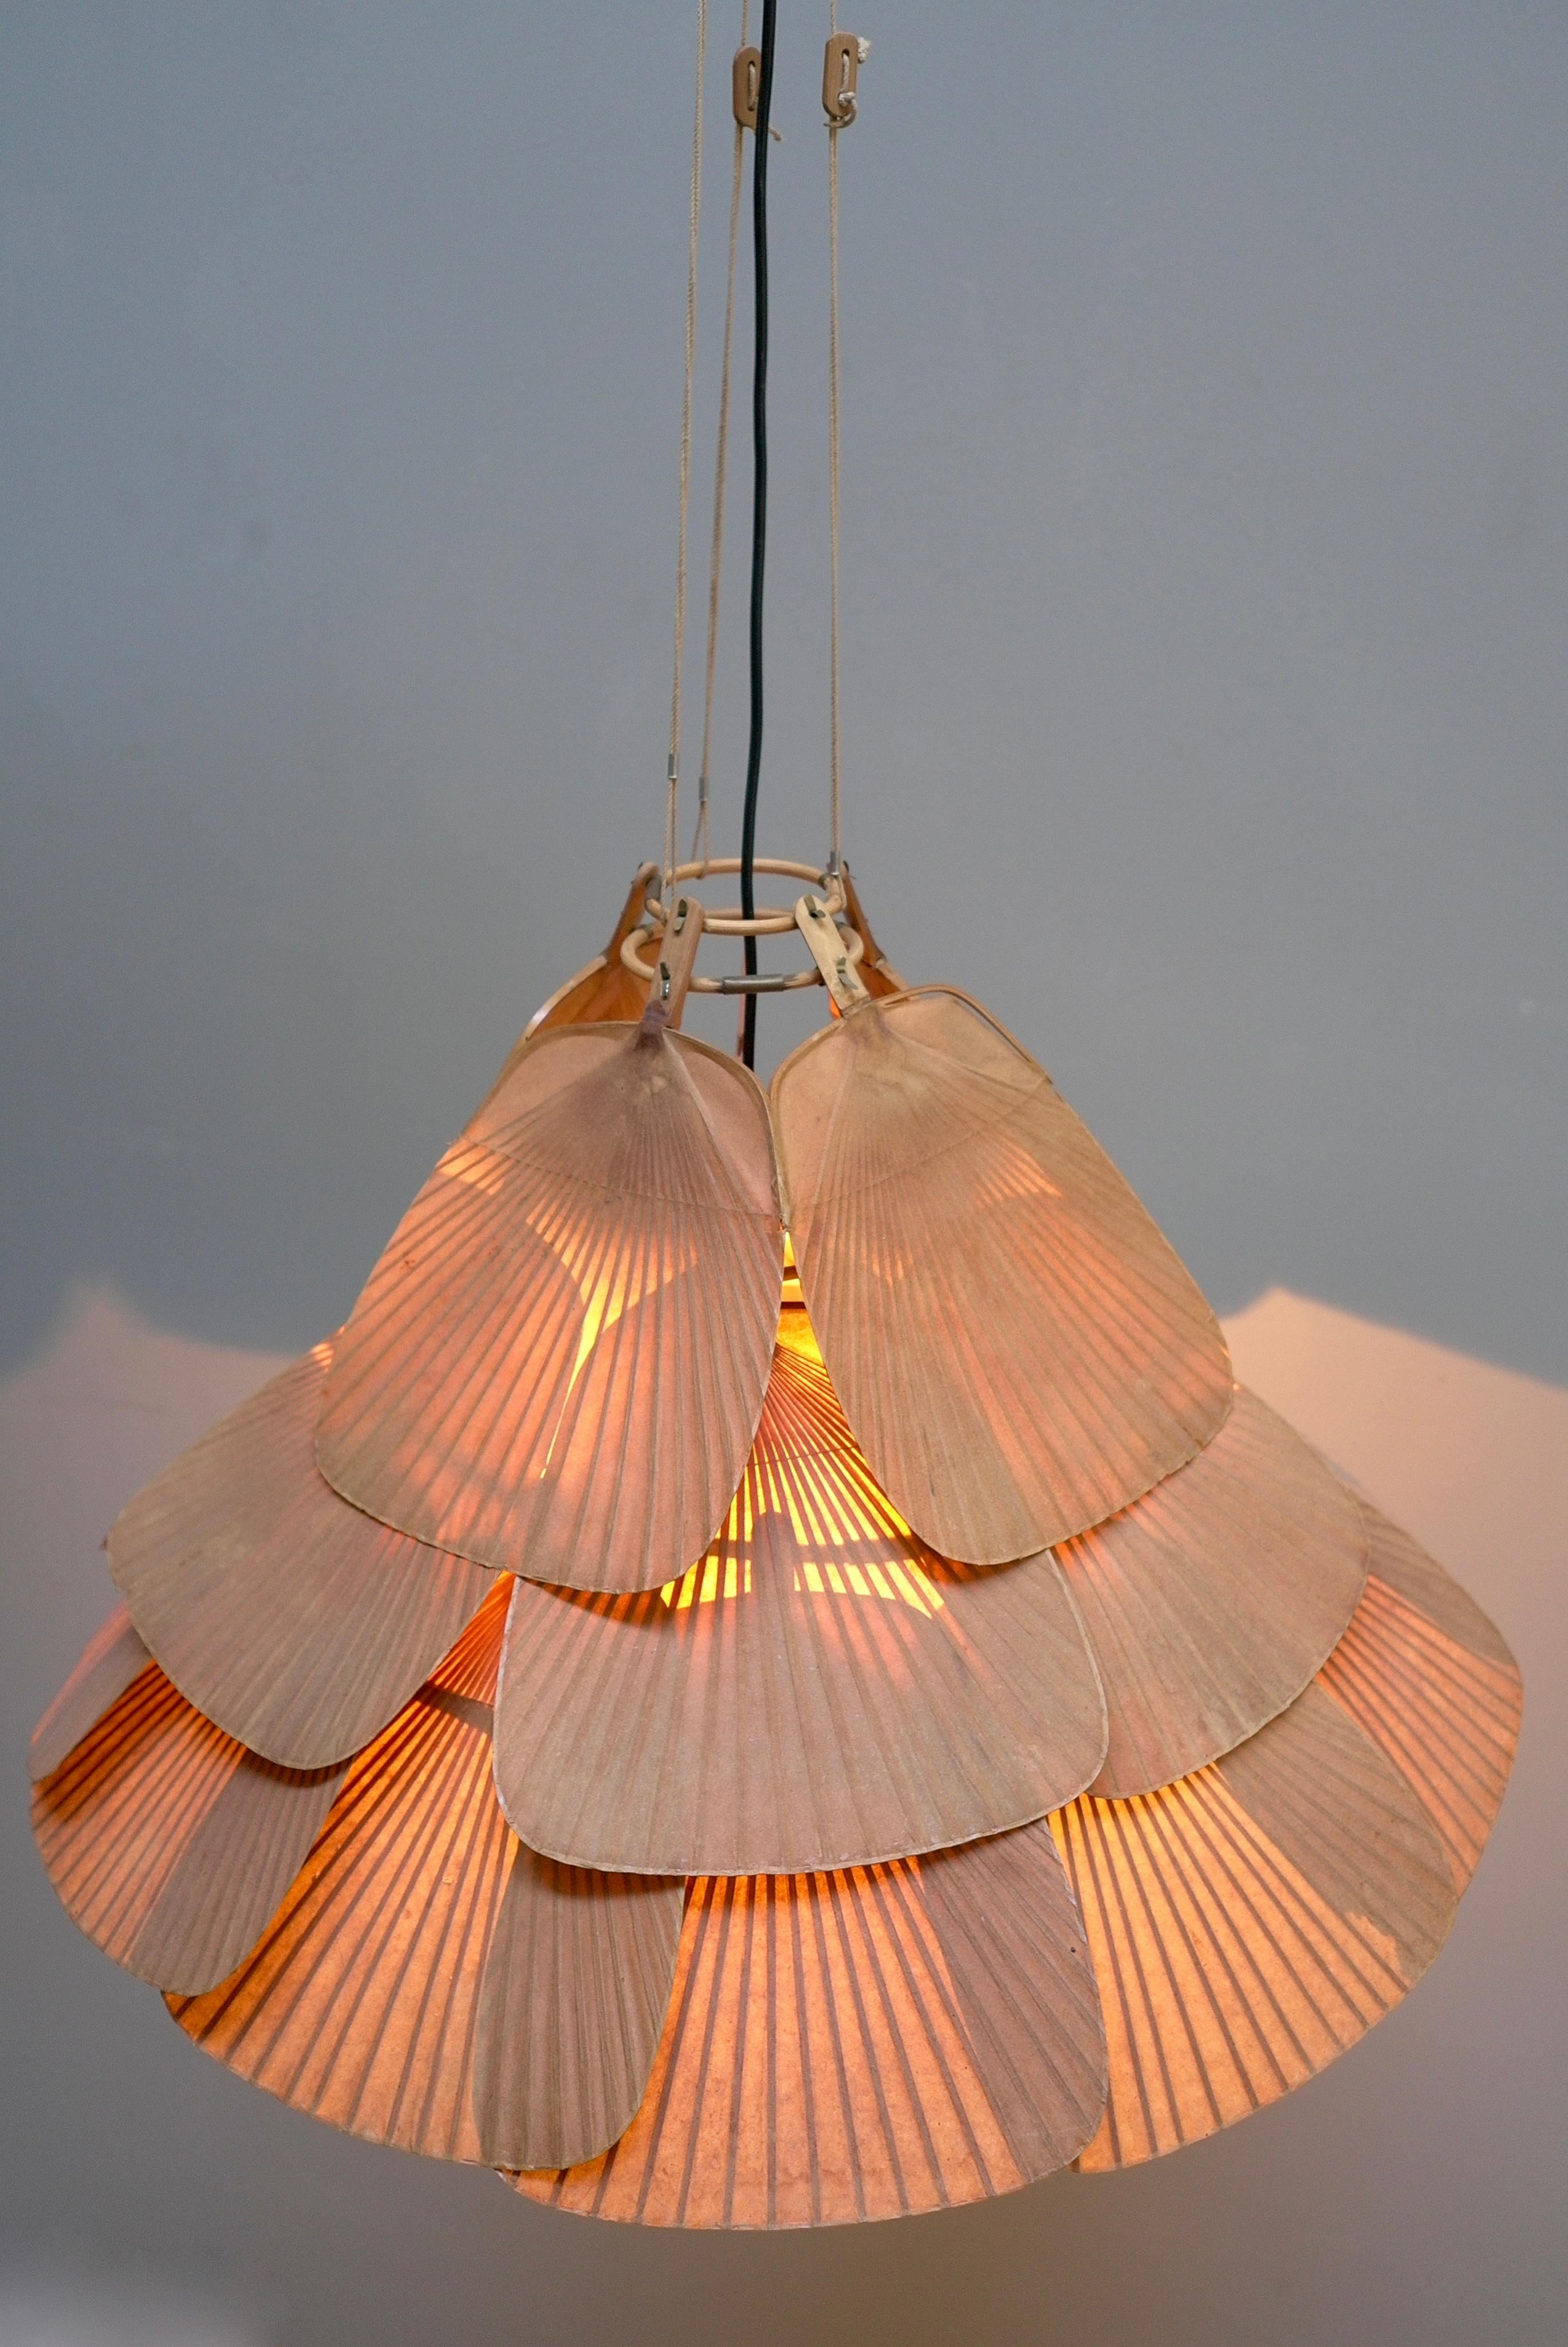 Rare large Uchiwa Fan chandelier by Ingo Maurer for M Design 1975

This lamp is handmade from bamboo and Japanese rice paper.

With cord the lamp is 120cm in height (and adjustable) the width is 70cm. Without cord it is 45 cm in height.